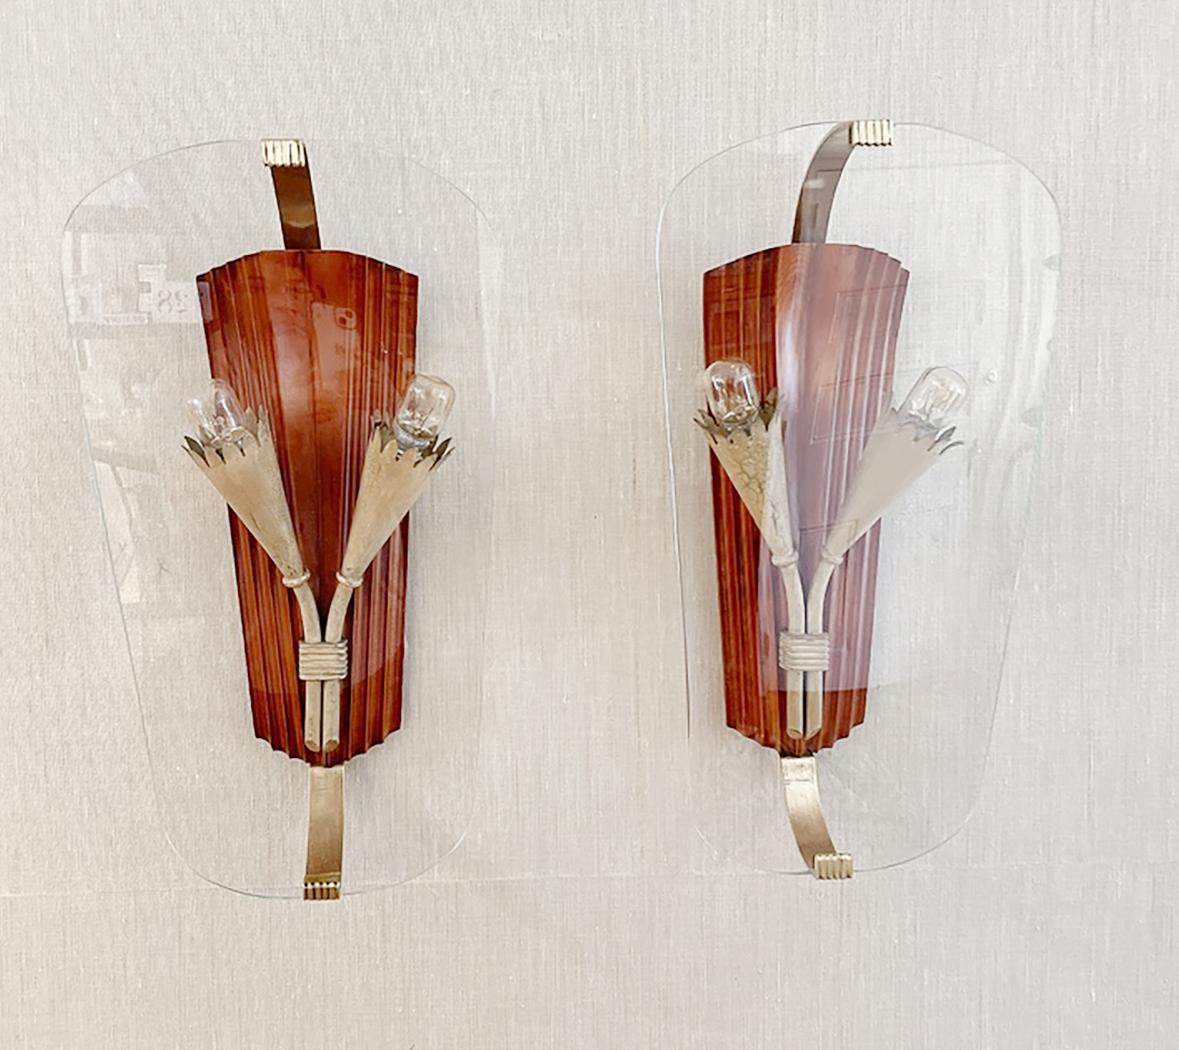 Pair of wall lamps. Wood, painted metal, bent and ground glass. Produced by Pietro Chiesa in Italy 1950s. Manufacturer's label.